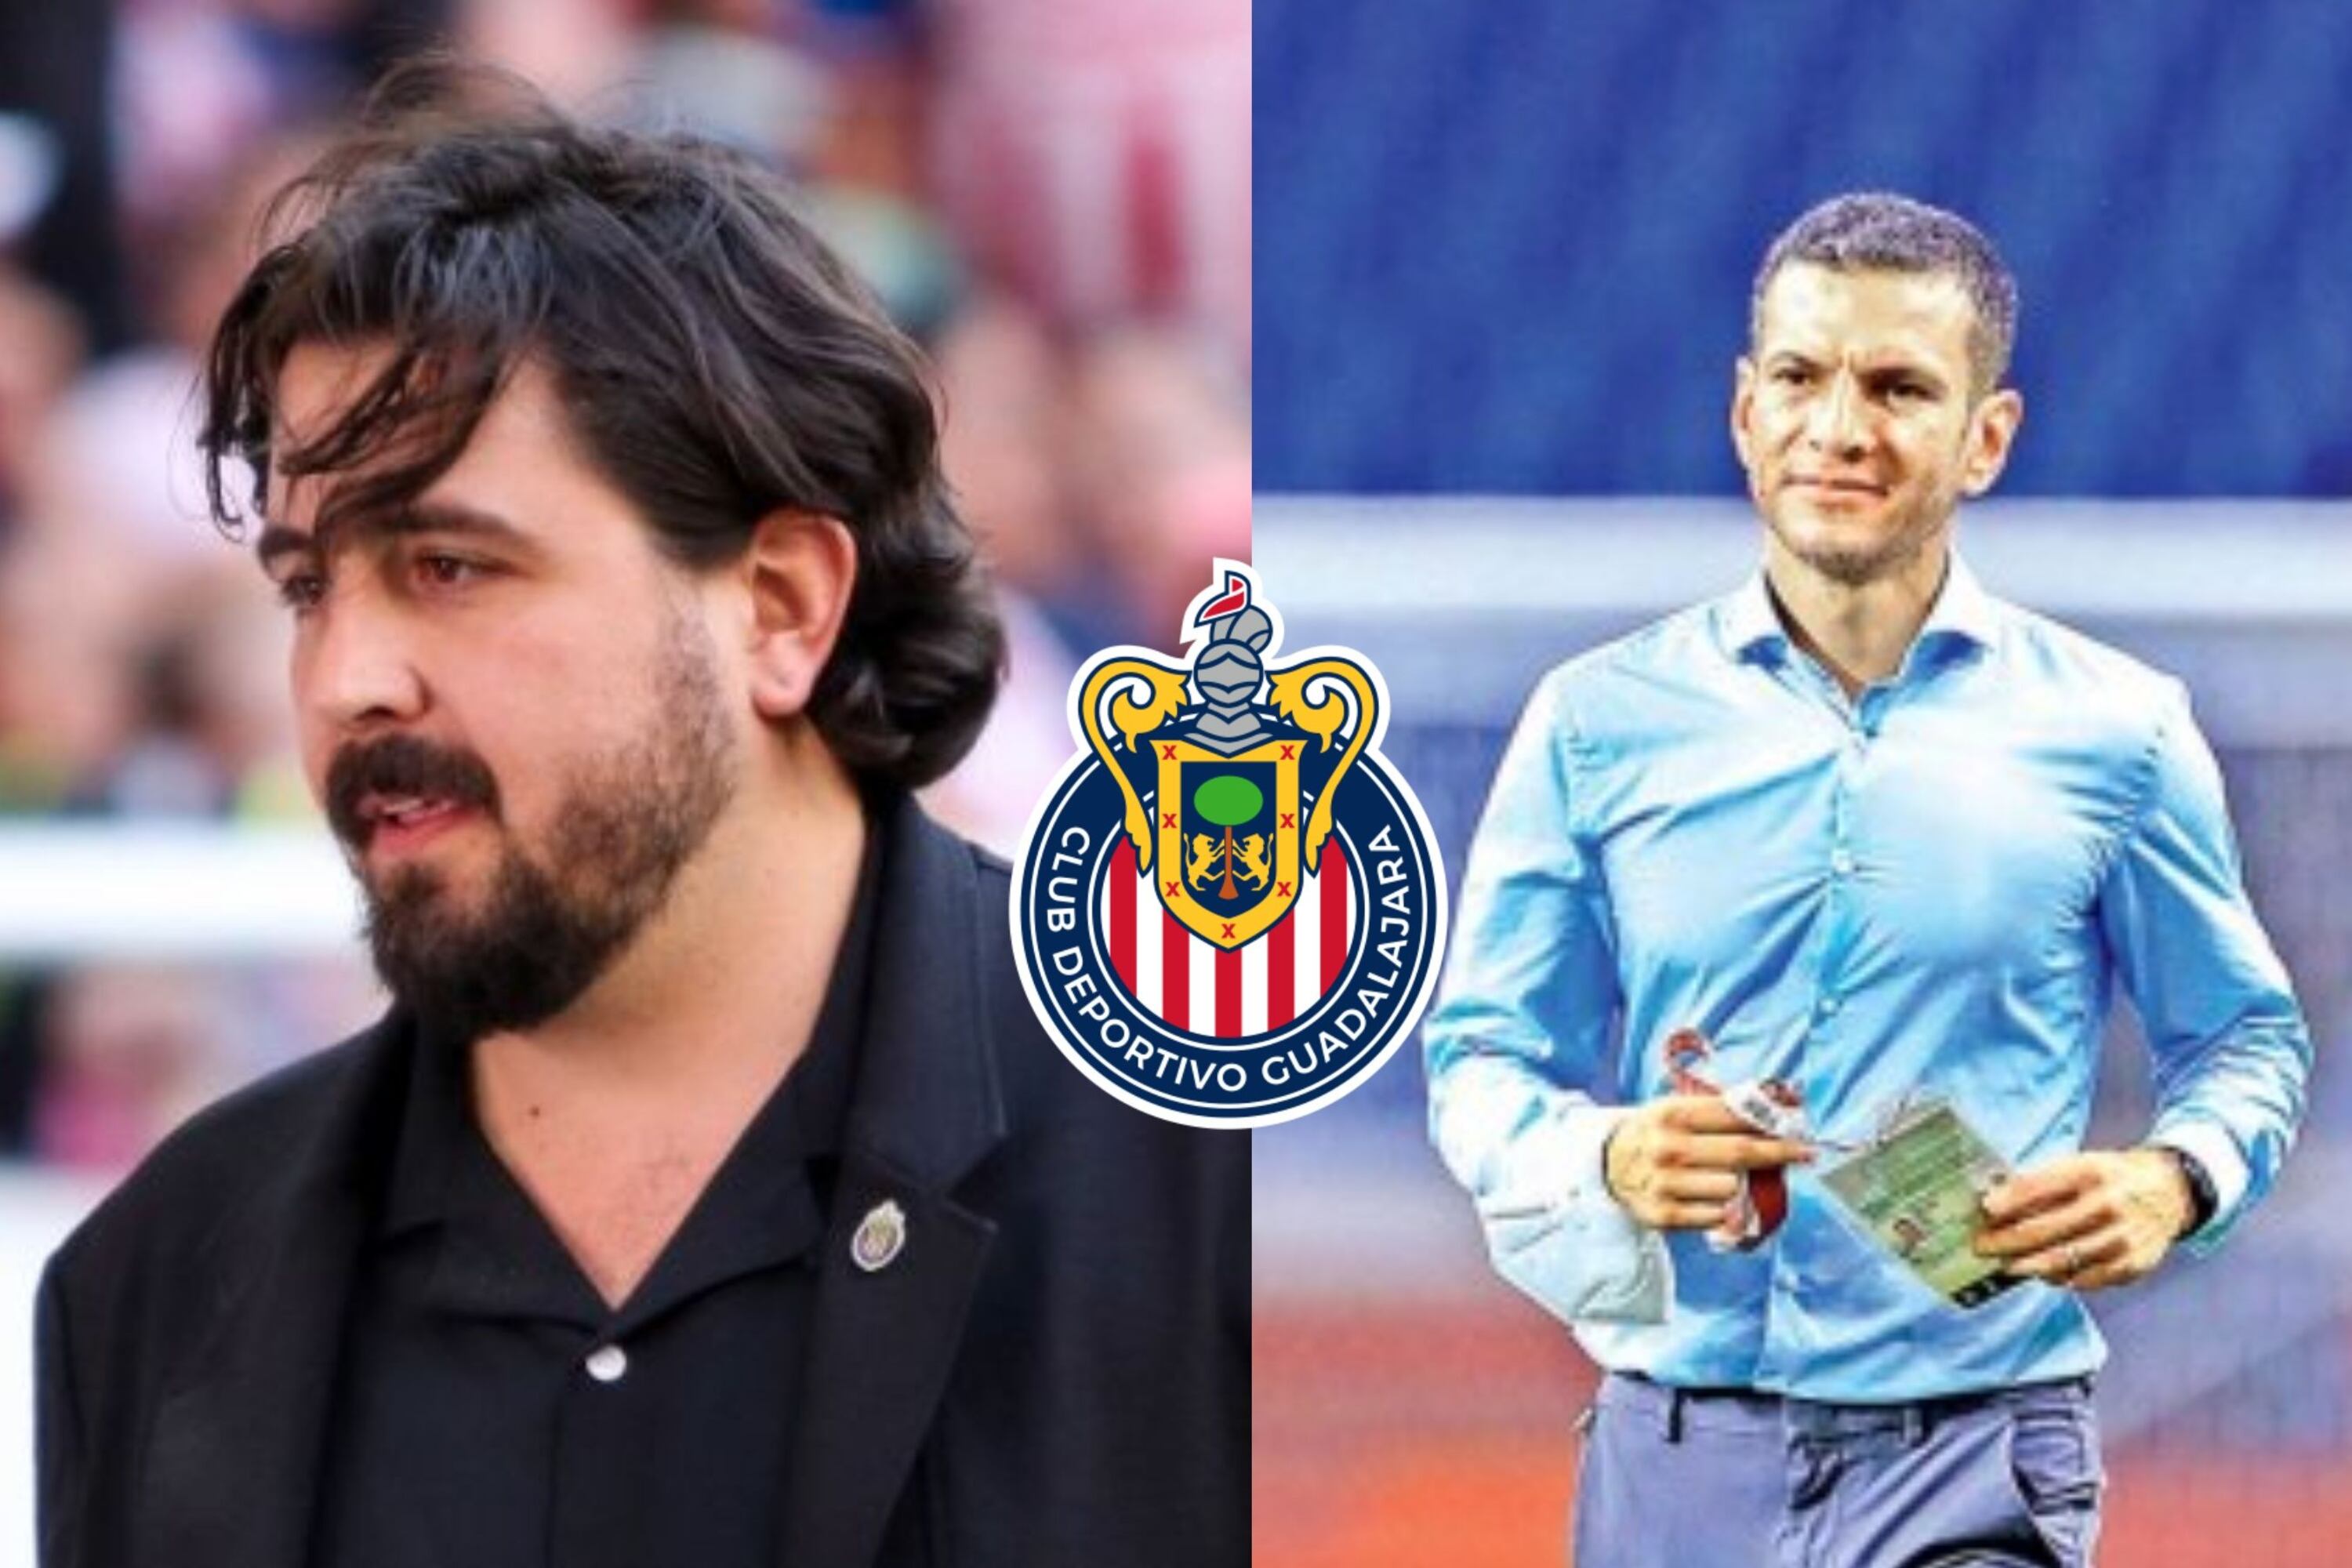 What Jaime Lozano asked for to be Chivas' coach but Vergara was afraid to do it